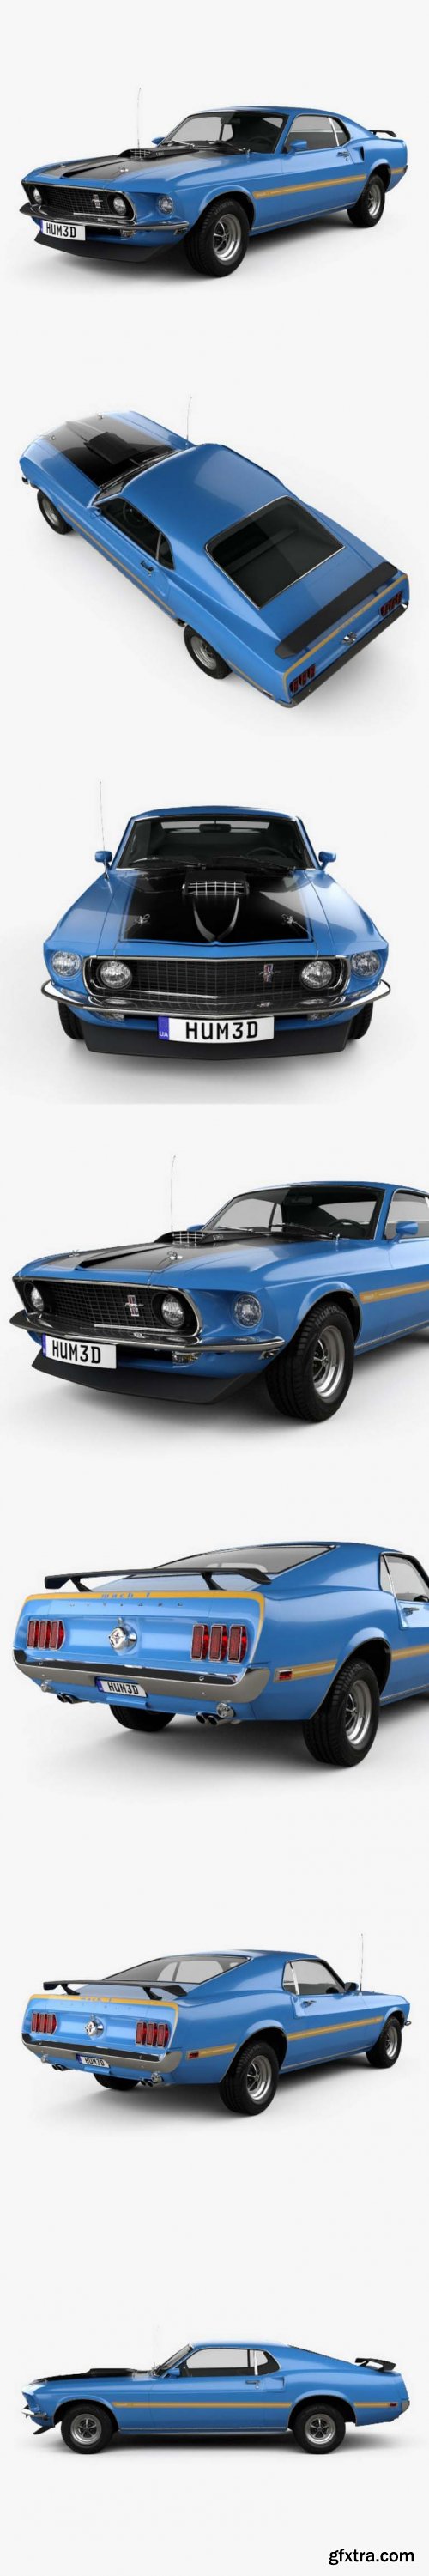 Ford Mustang Mach 1 351 1969 3D Model